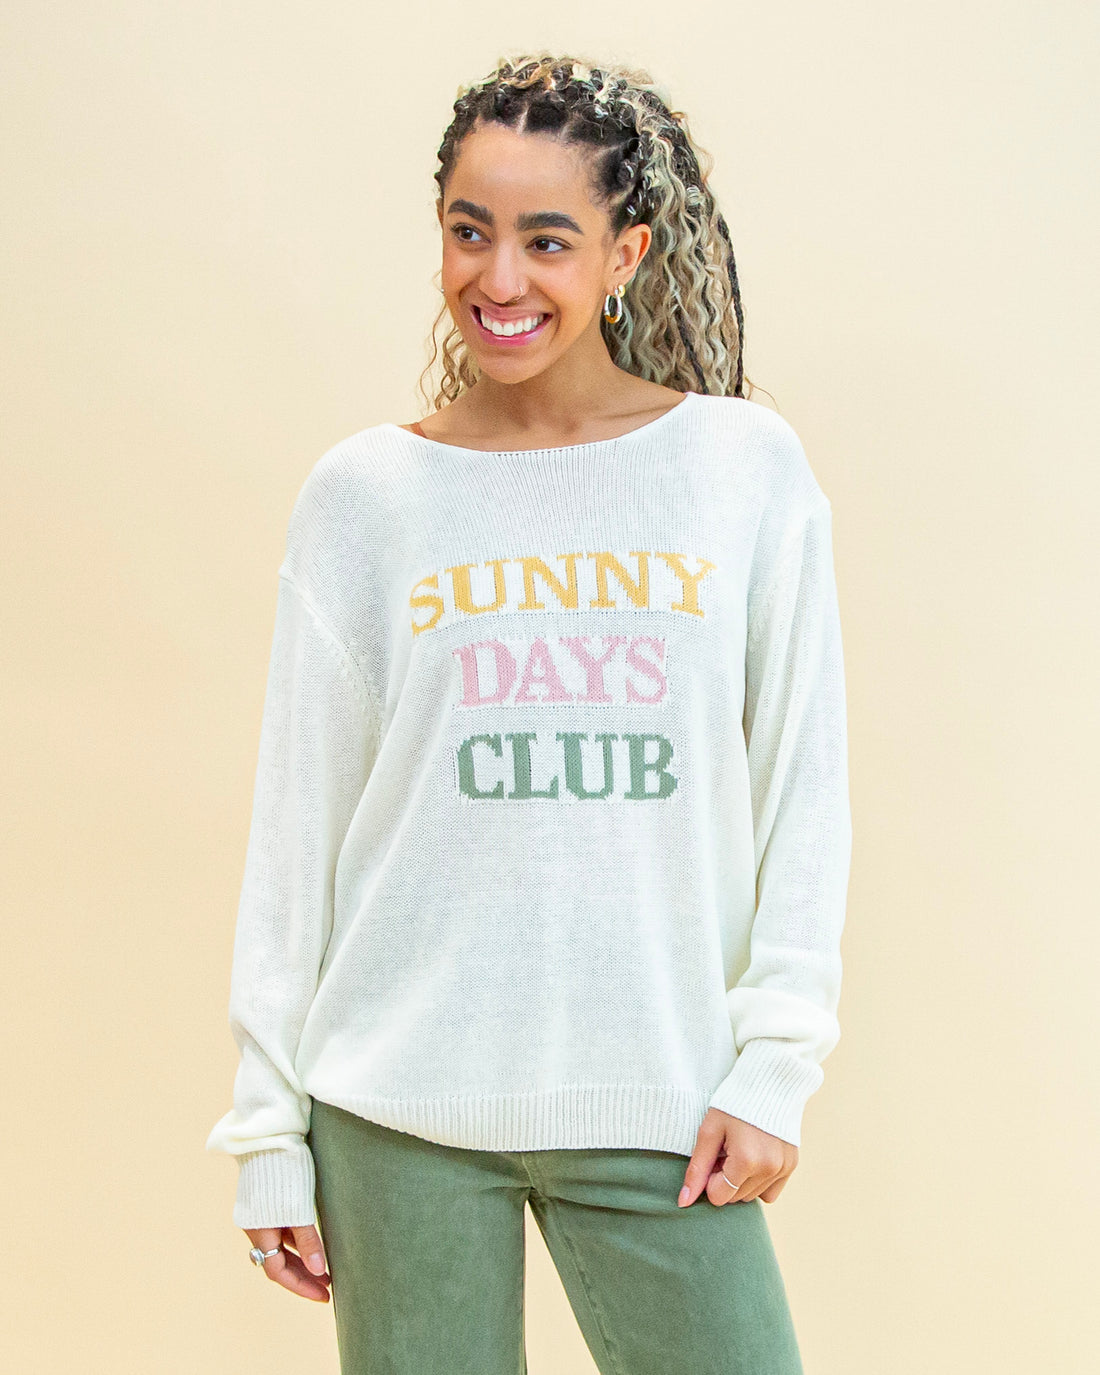  Sunny Days Club Sweater in White (8322865398011)